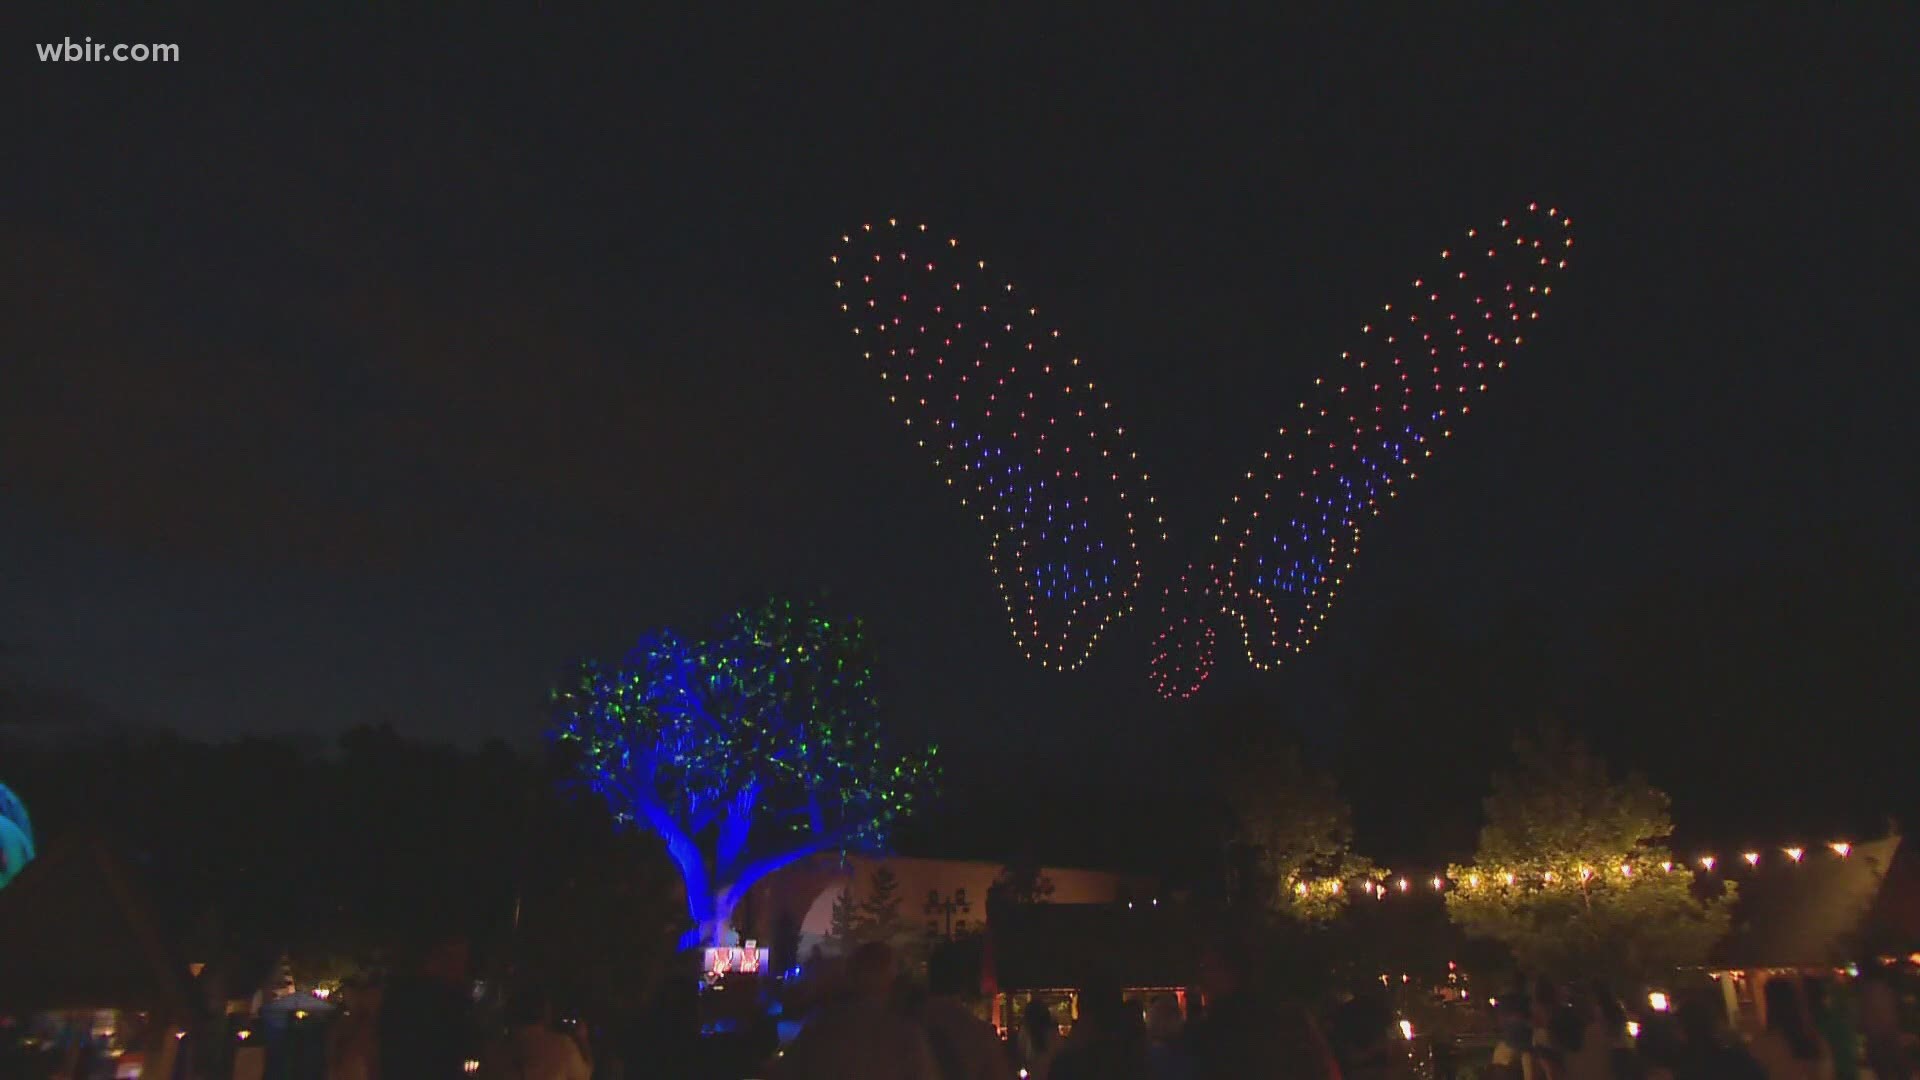 Drones are lighting up the Dollywood sky!